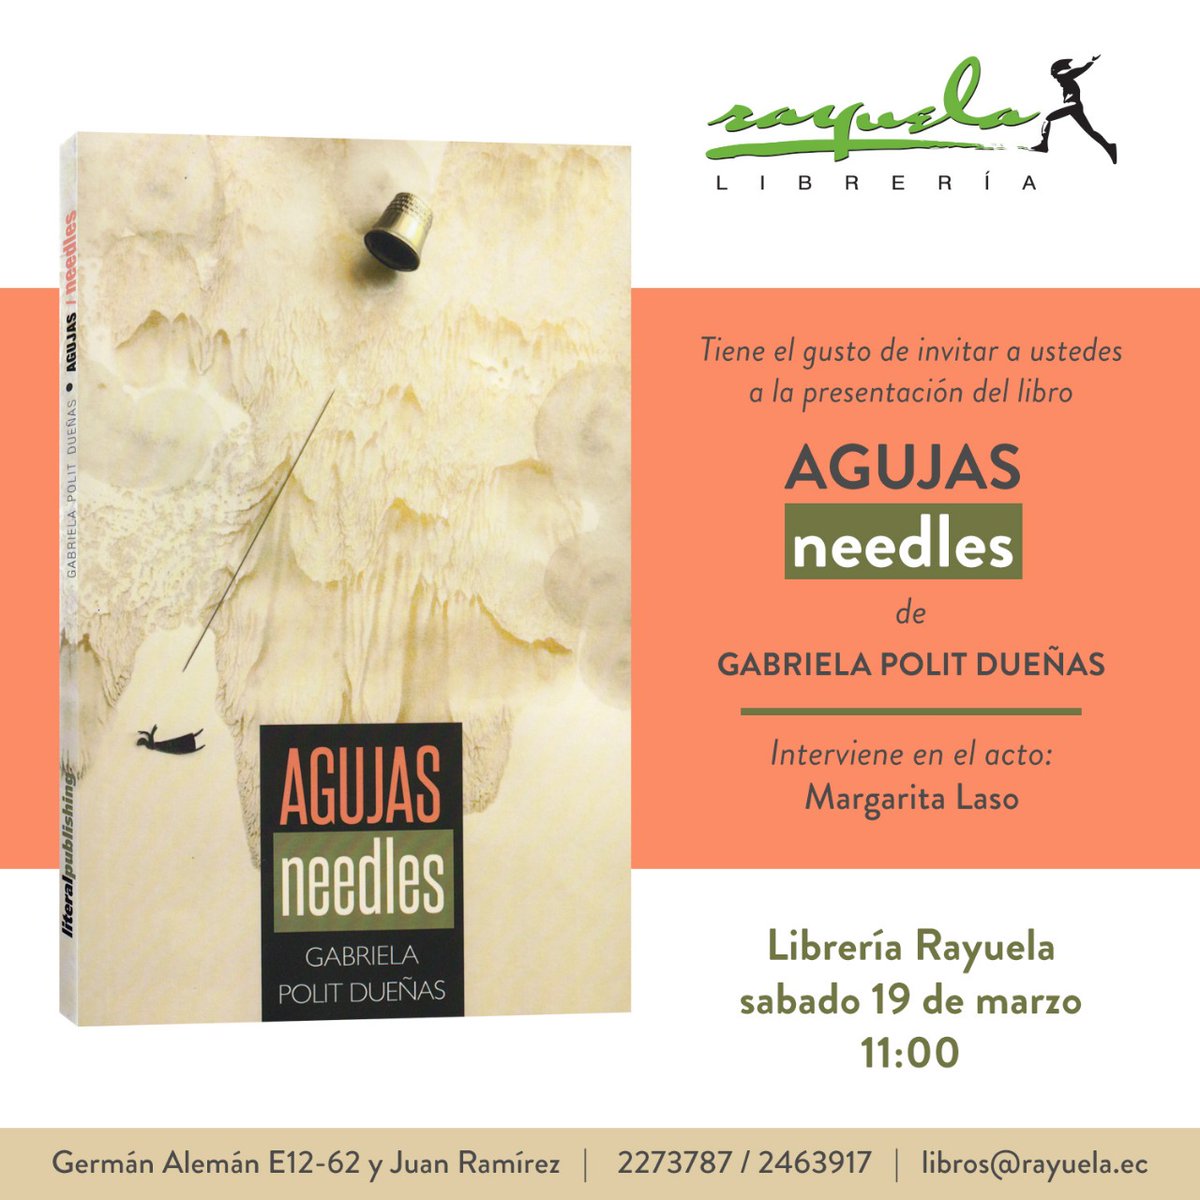 Professor Gabriela Polit presented her new book of poems, Agujas, which has been published with an English version translated by Professor Sean Manning. Congratulations to both of you!